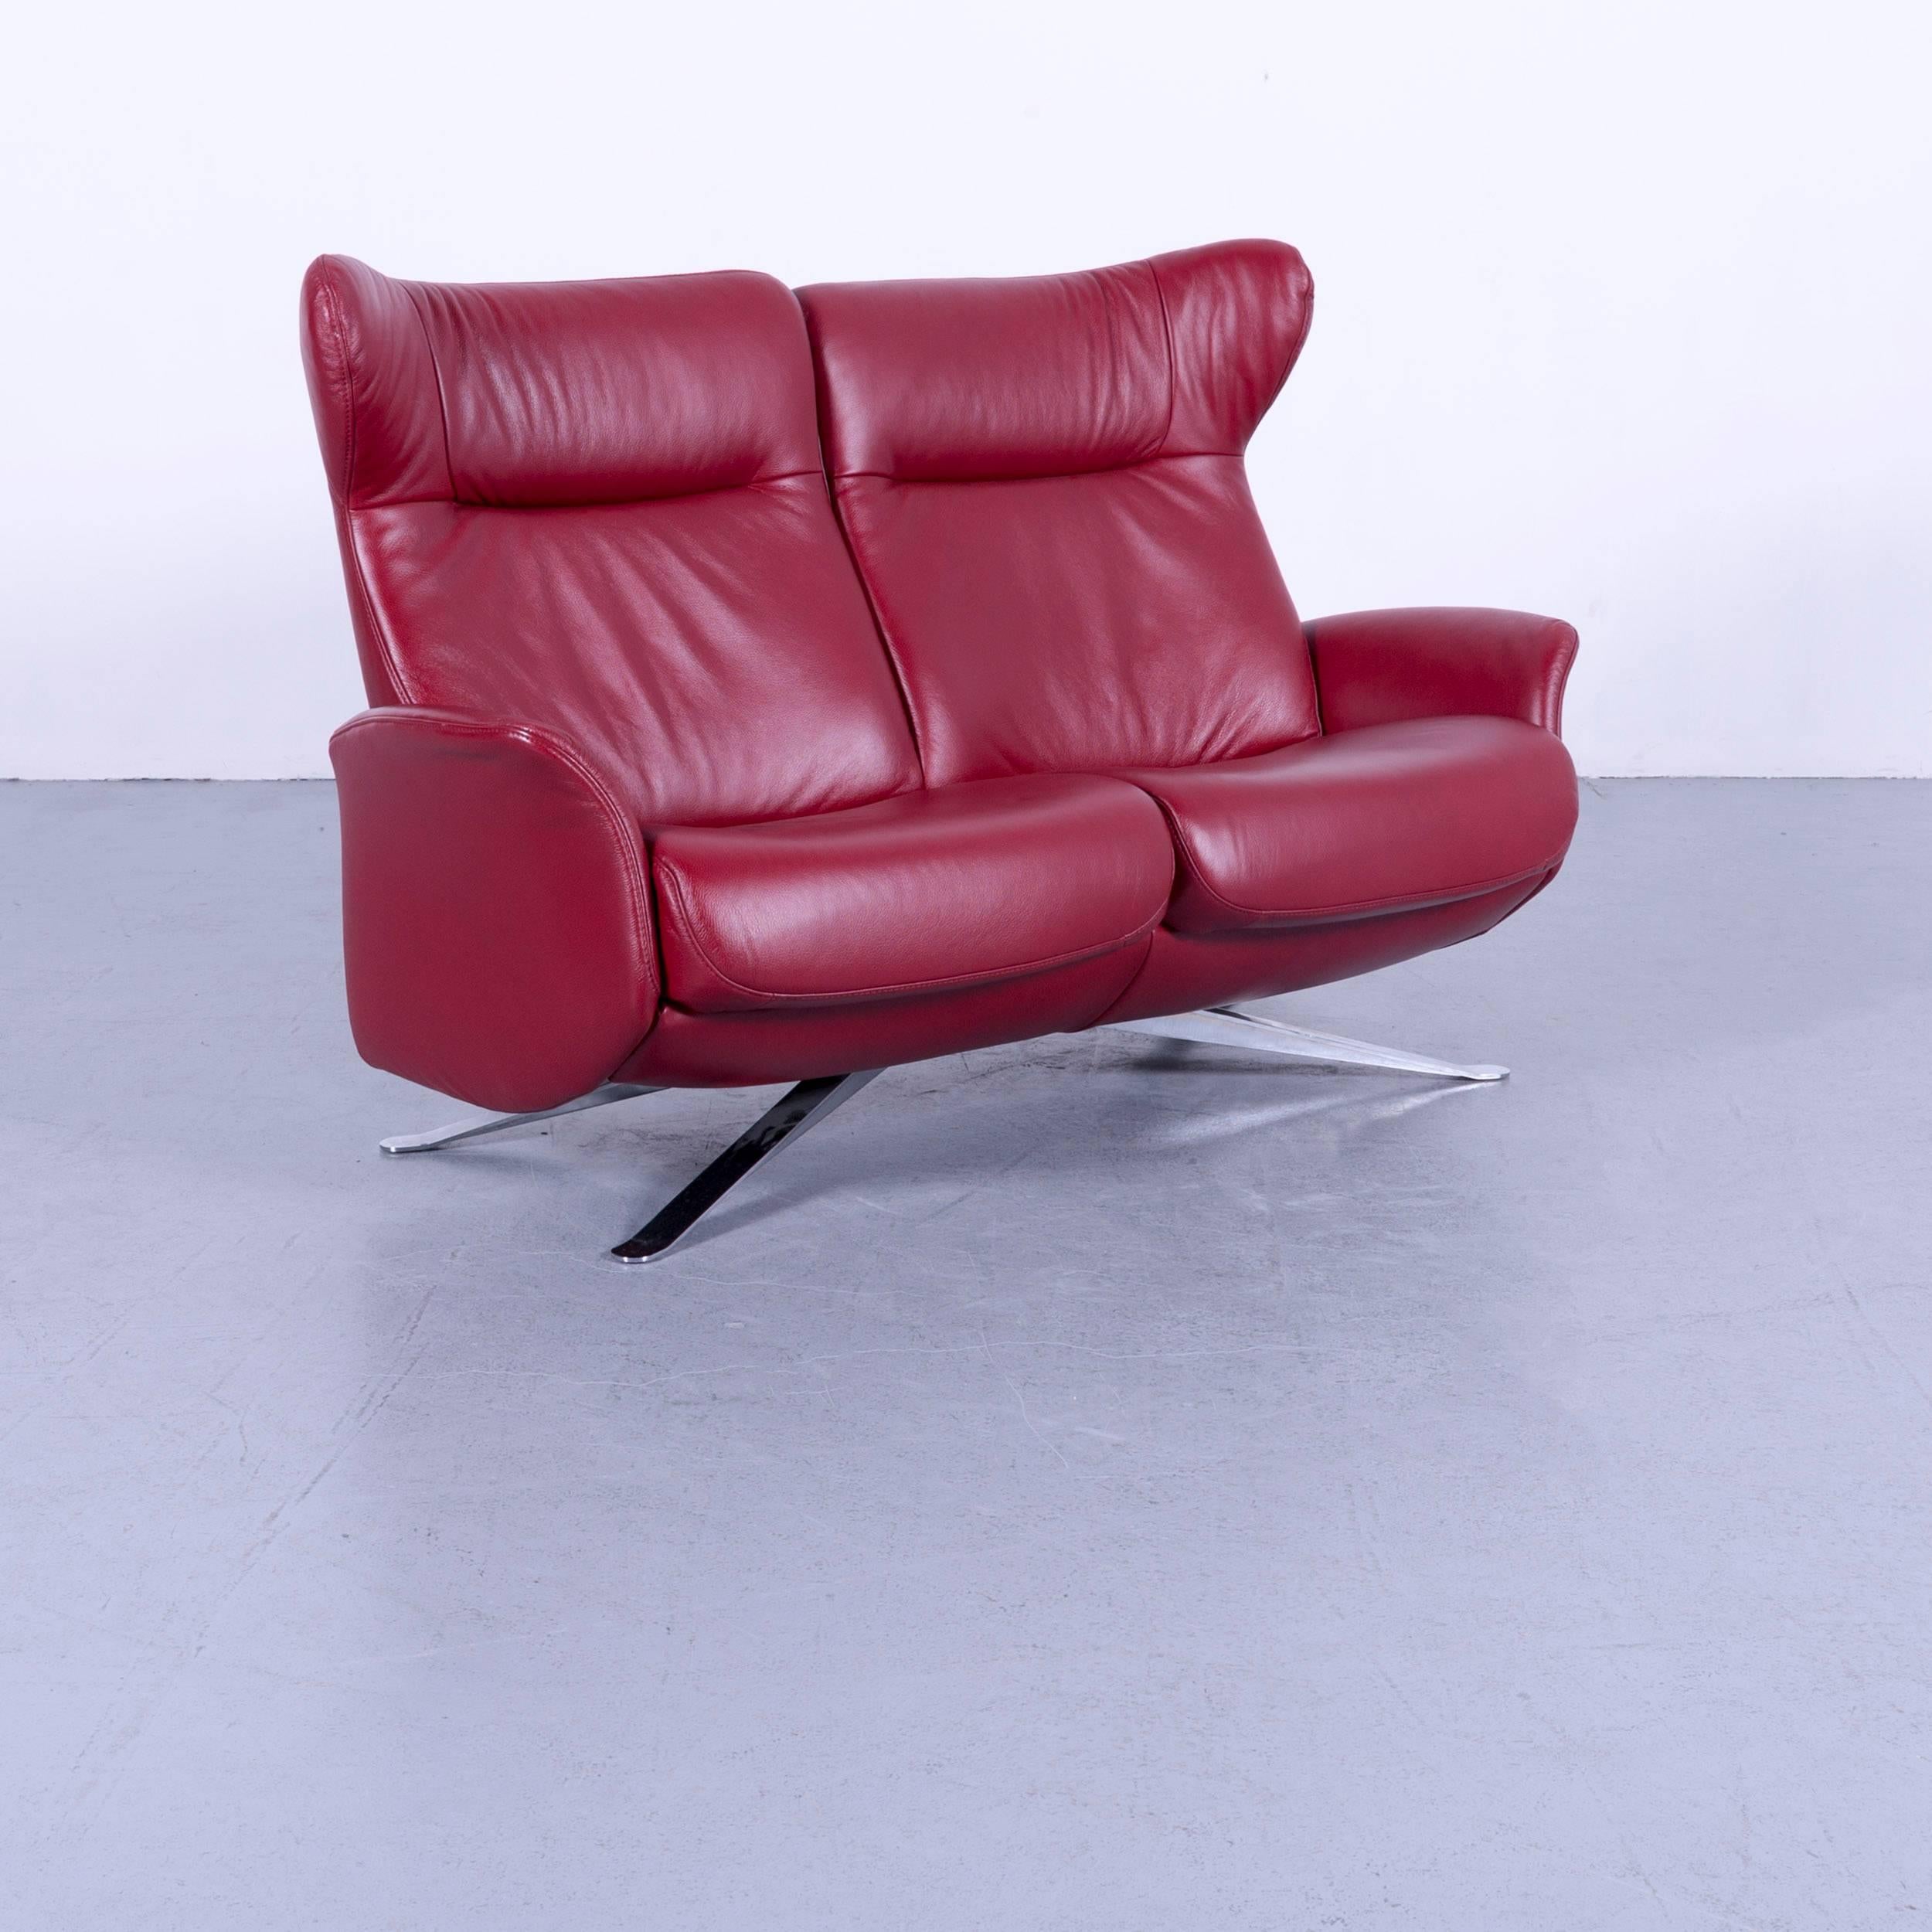 We bring to you an Joop, leather sofa red two-seat recliner.